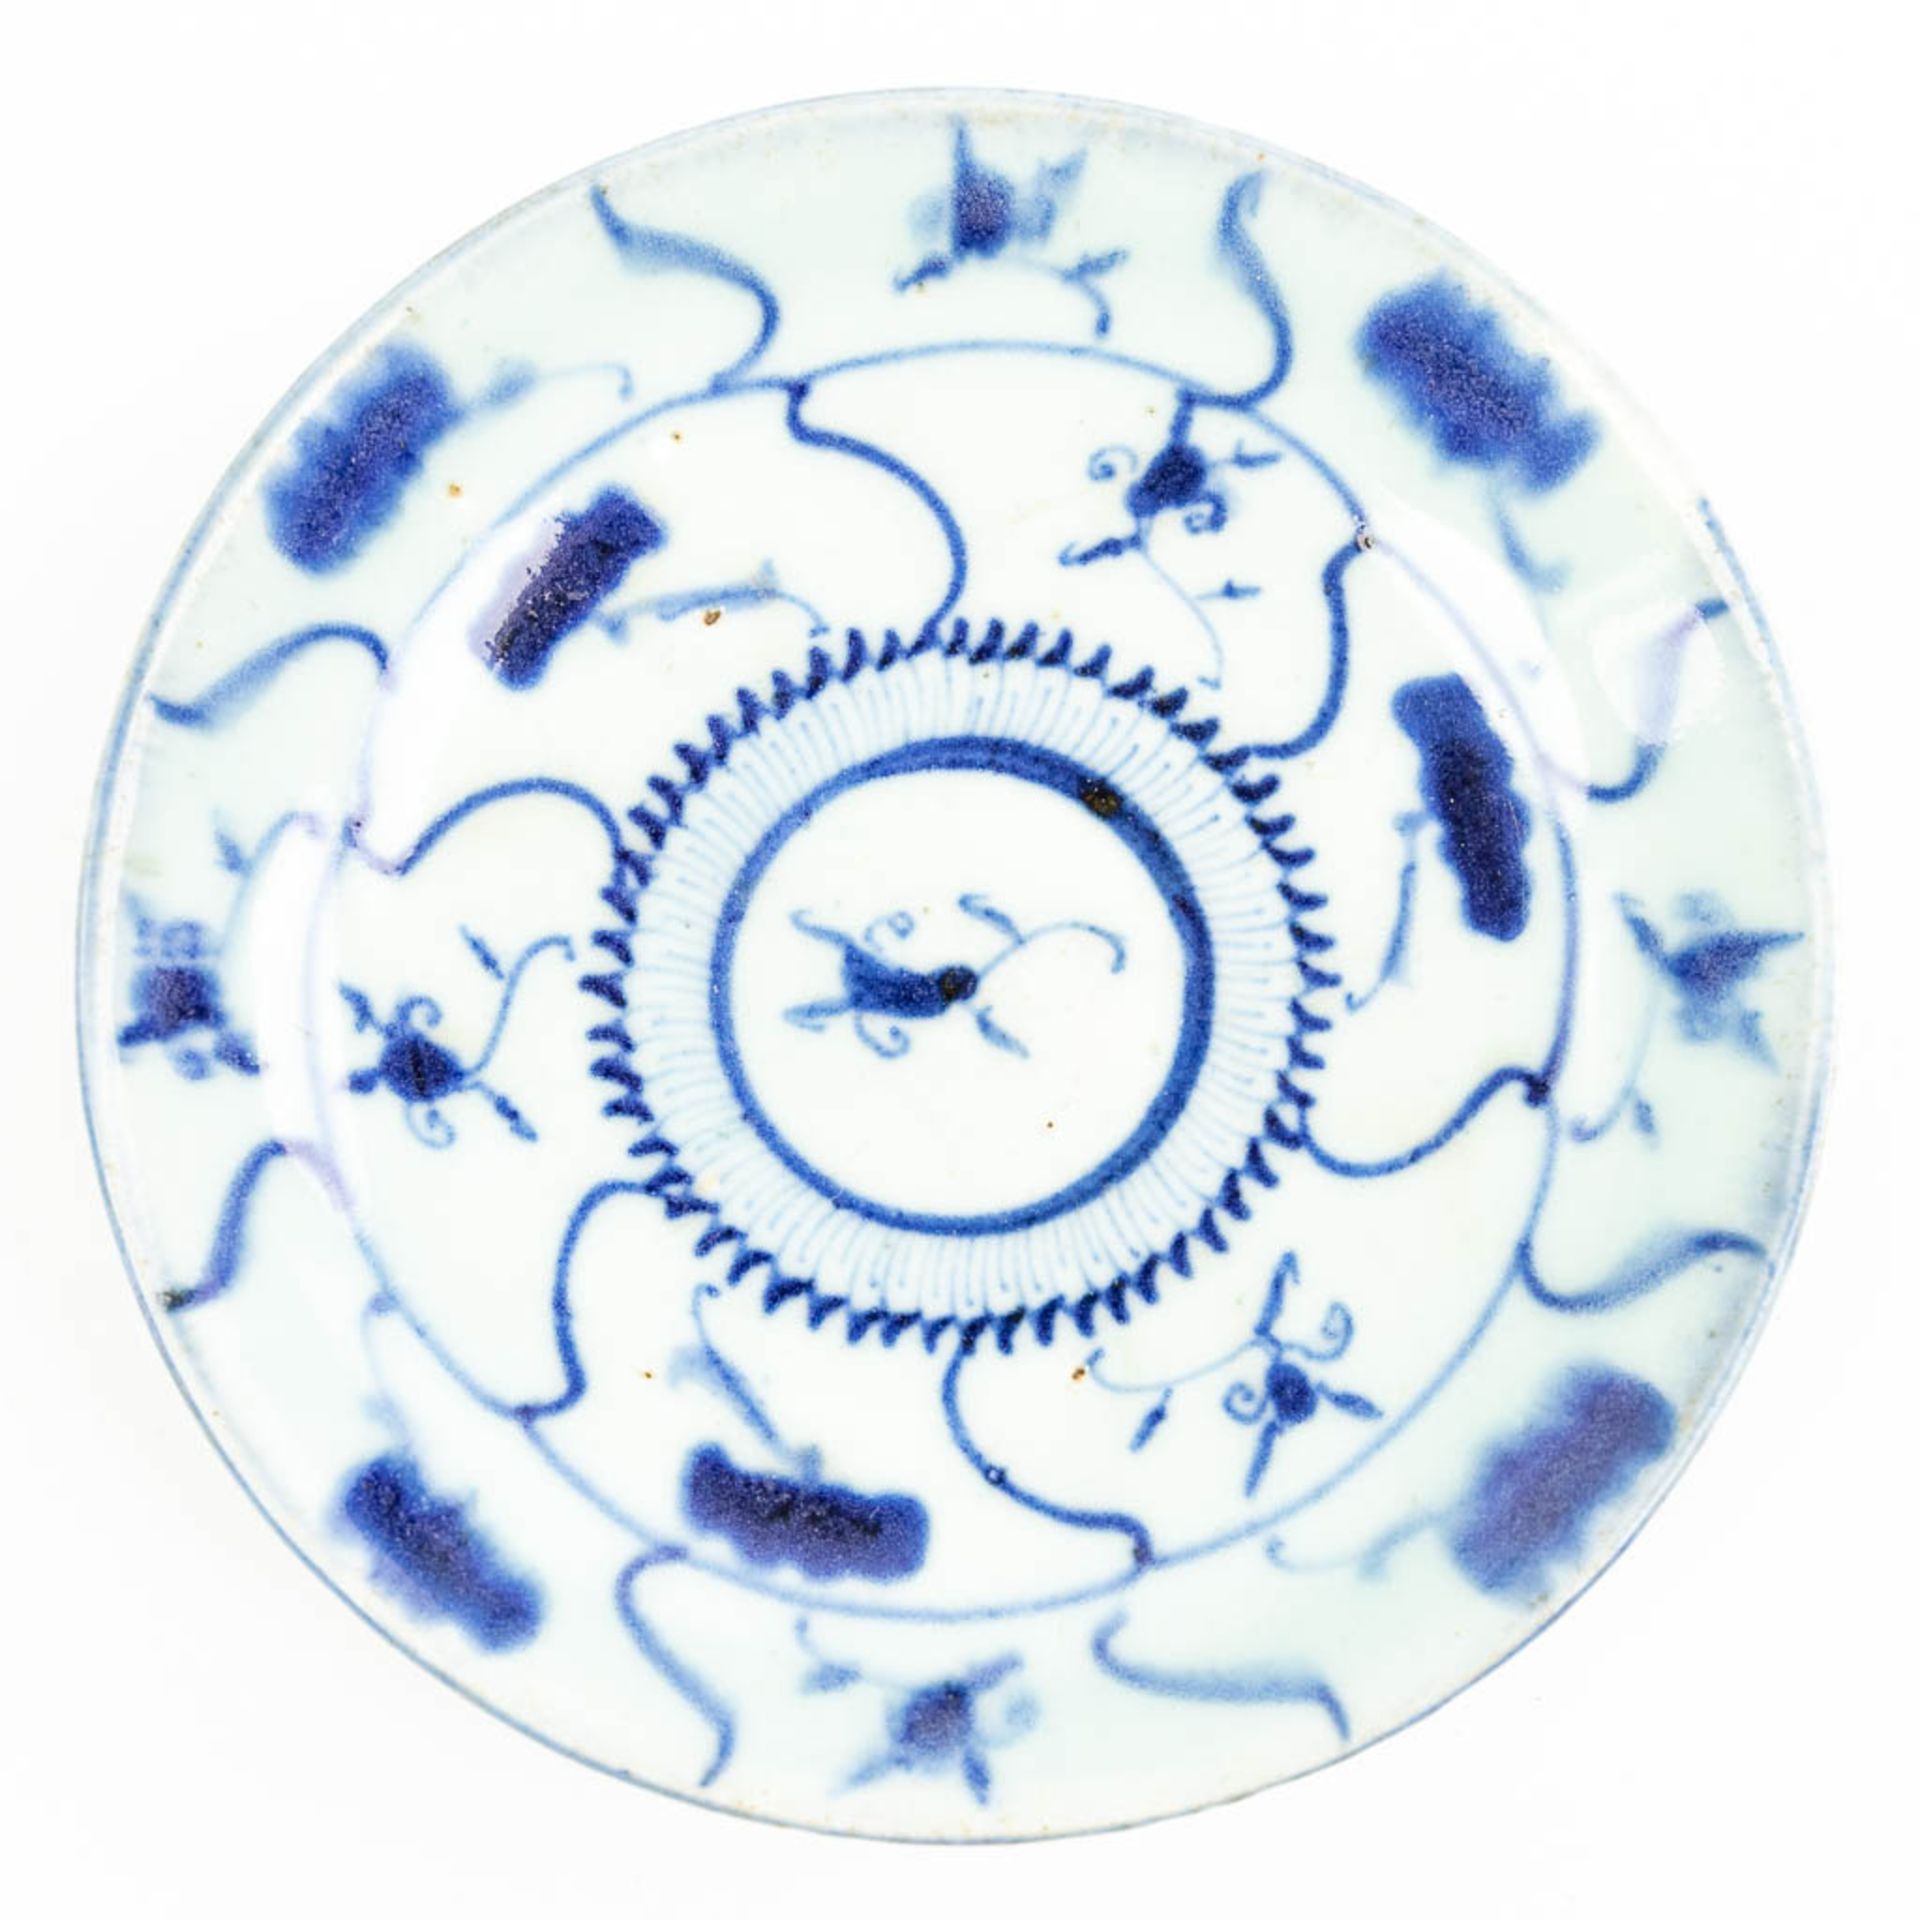 A collection of 5 plates made of Chinese porcelain with different patterns. - Image 5 of 15